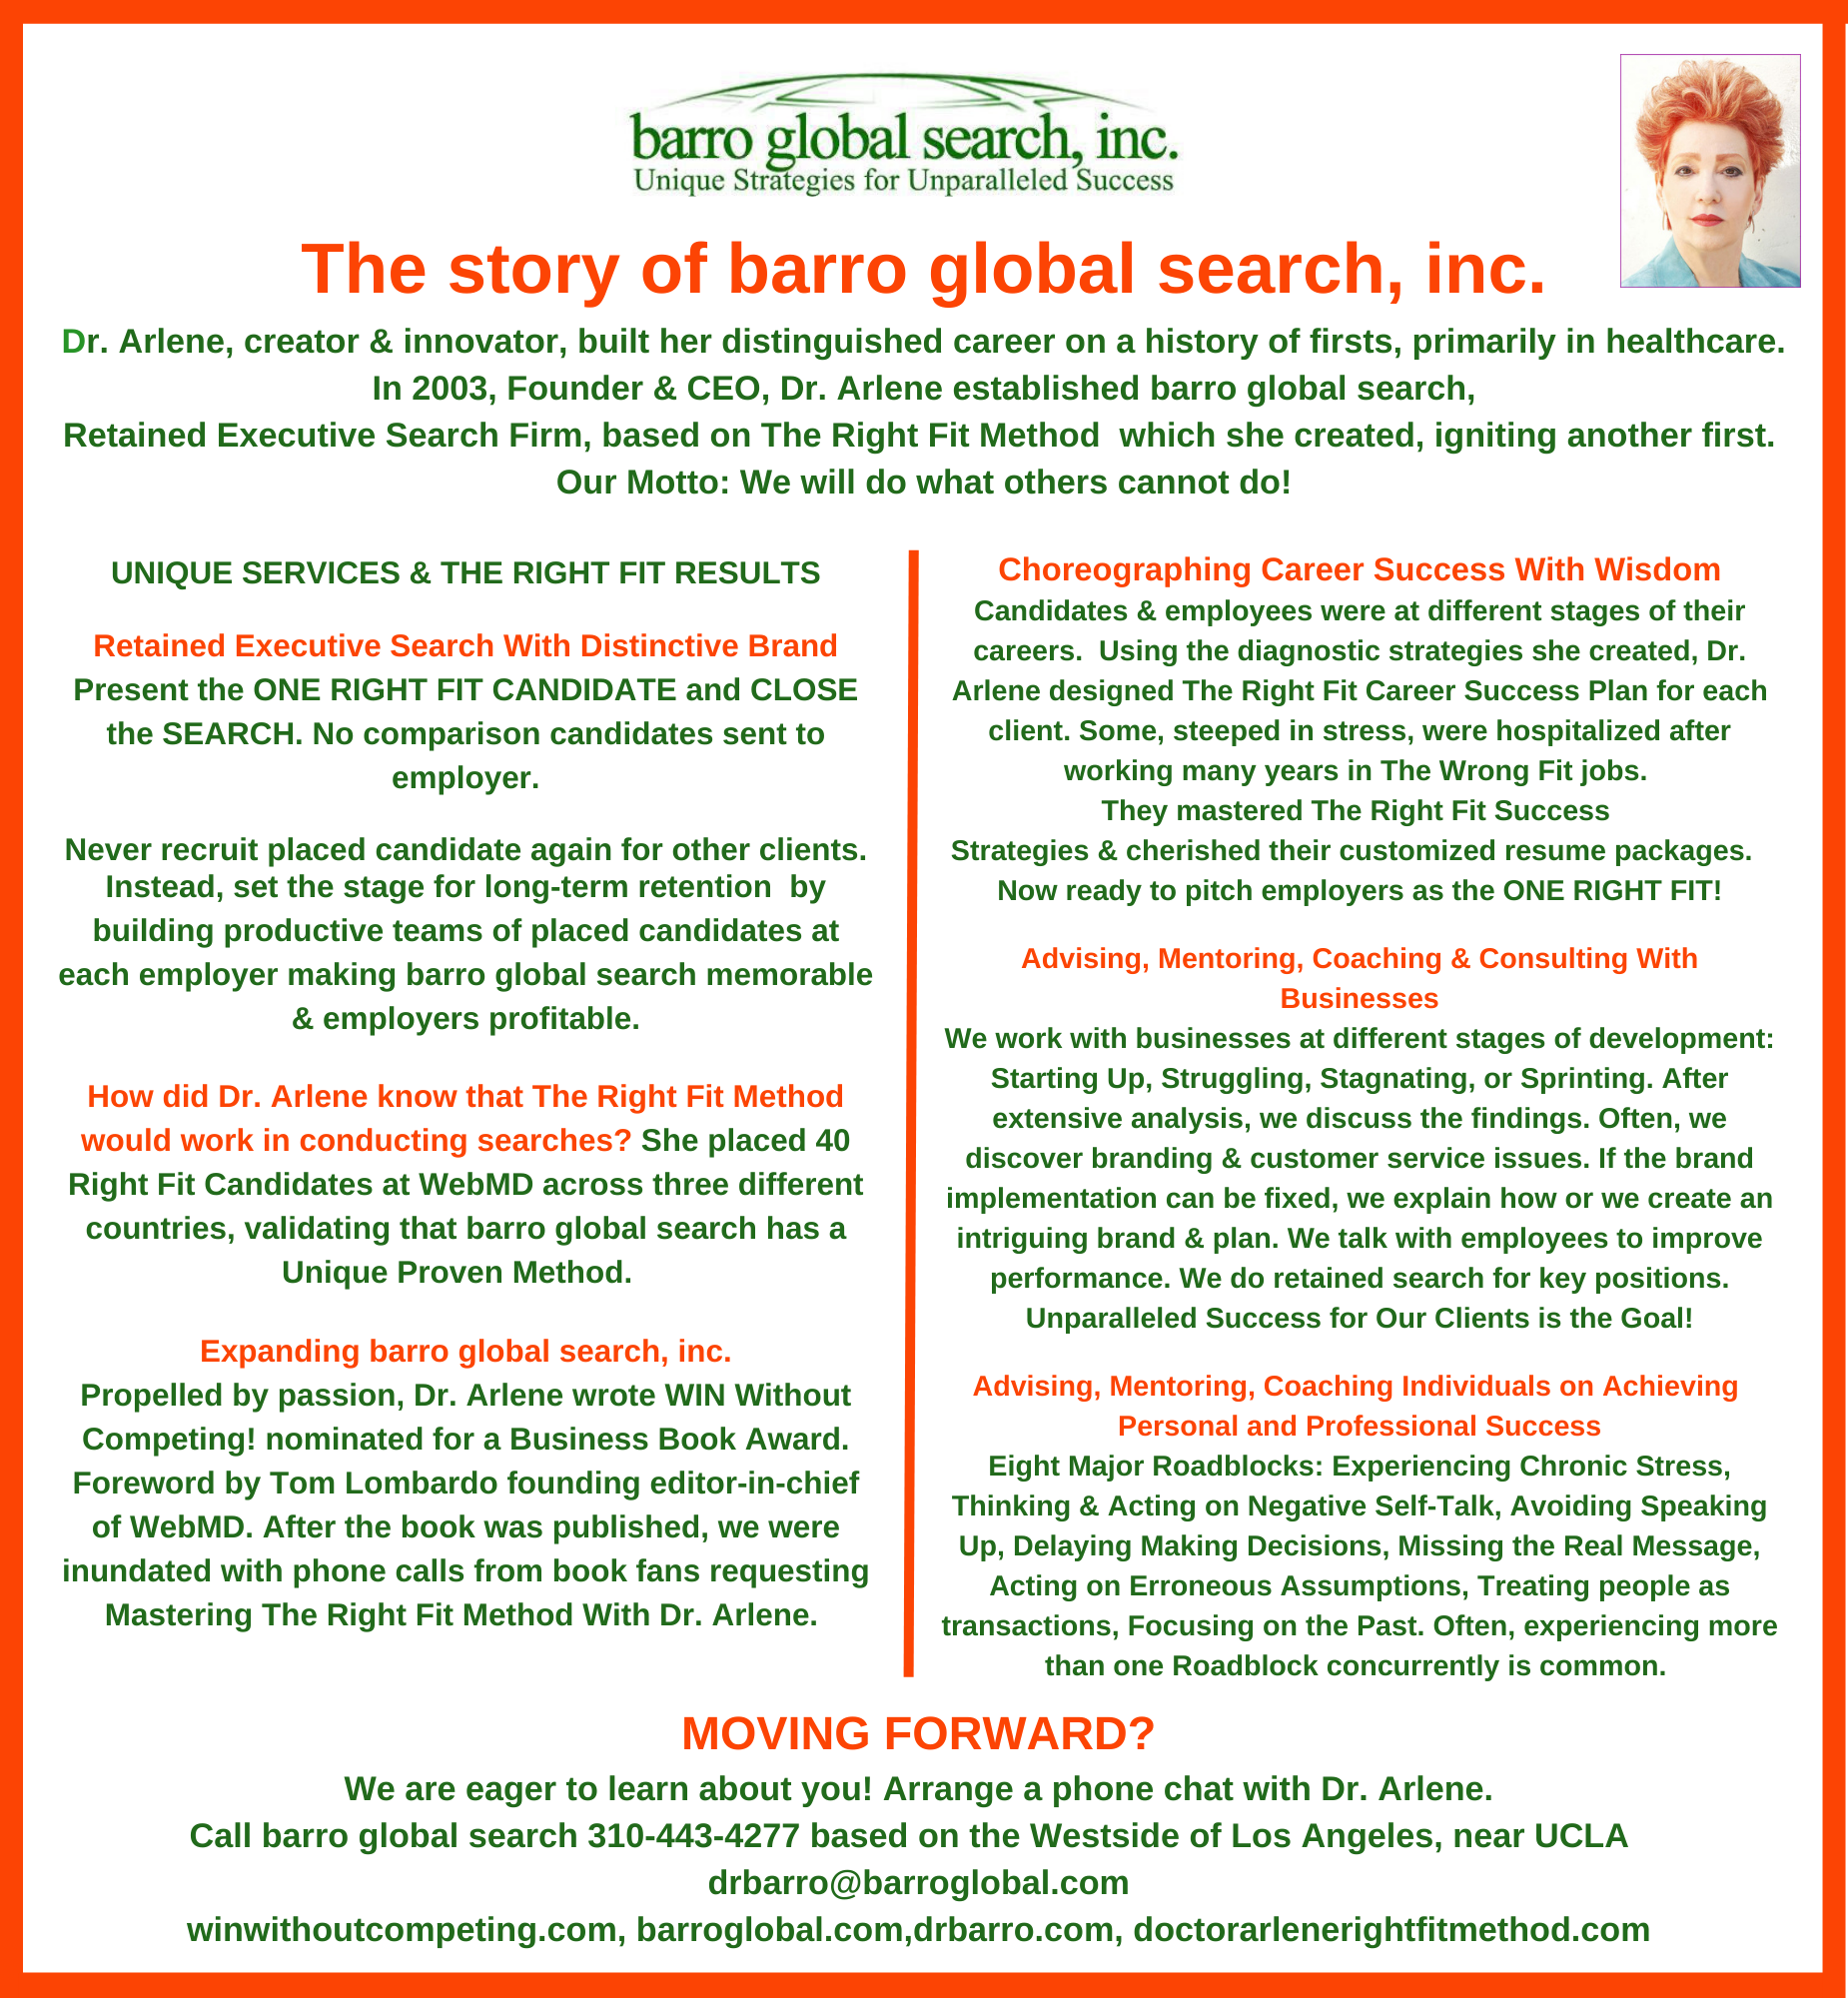 the story of barro global search, inc.